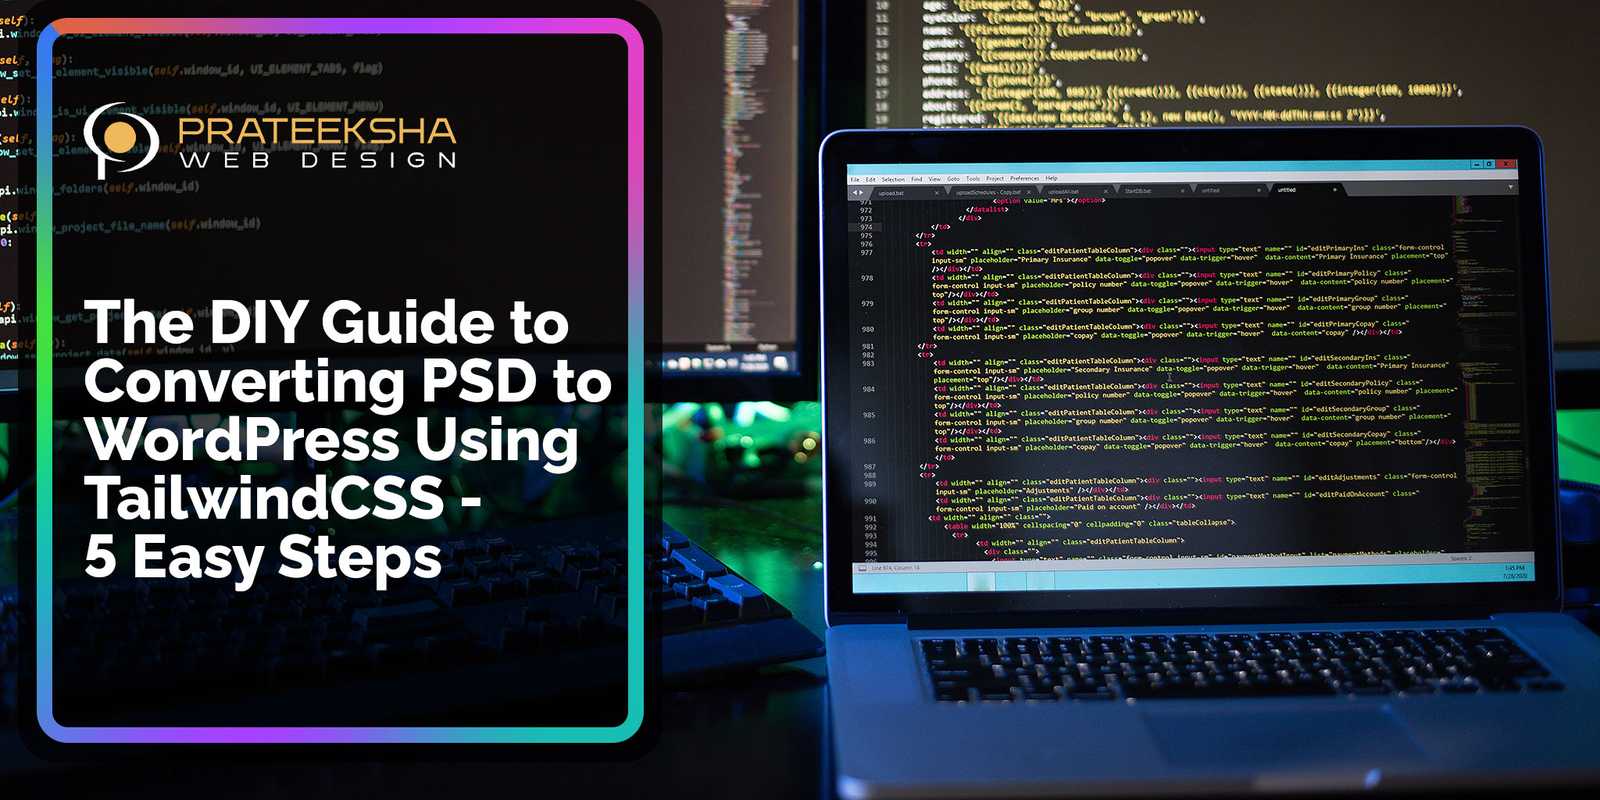 The DIY Guide to Converting PSD to WordPress Using TailwindCSS - 5 Easy Steps